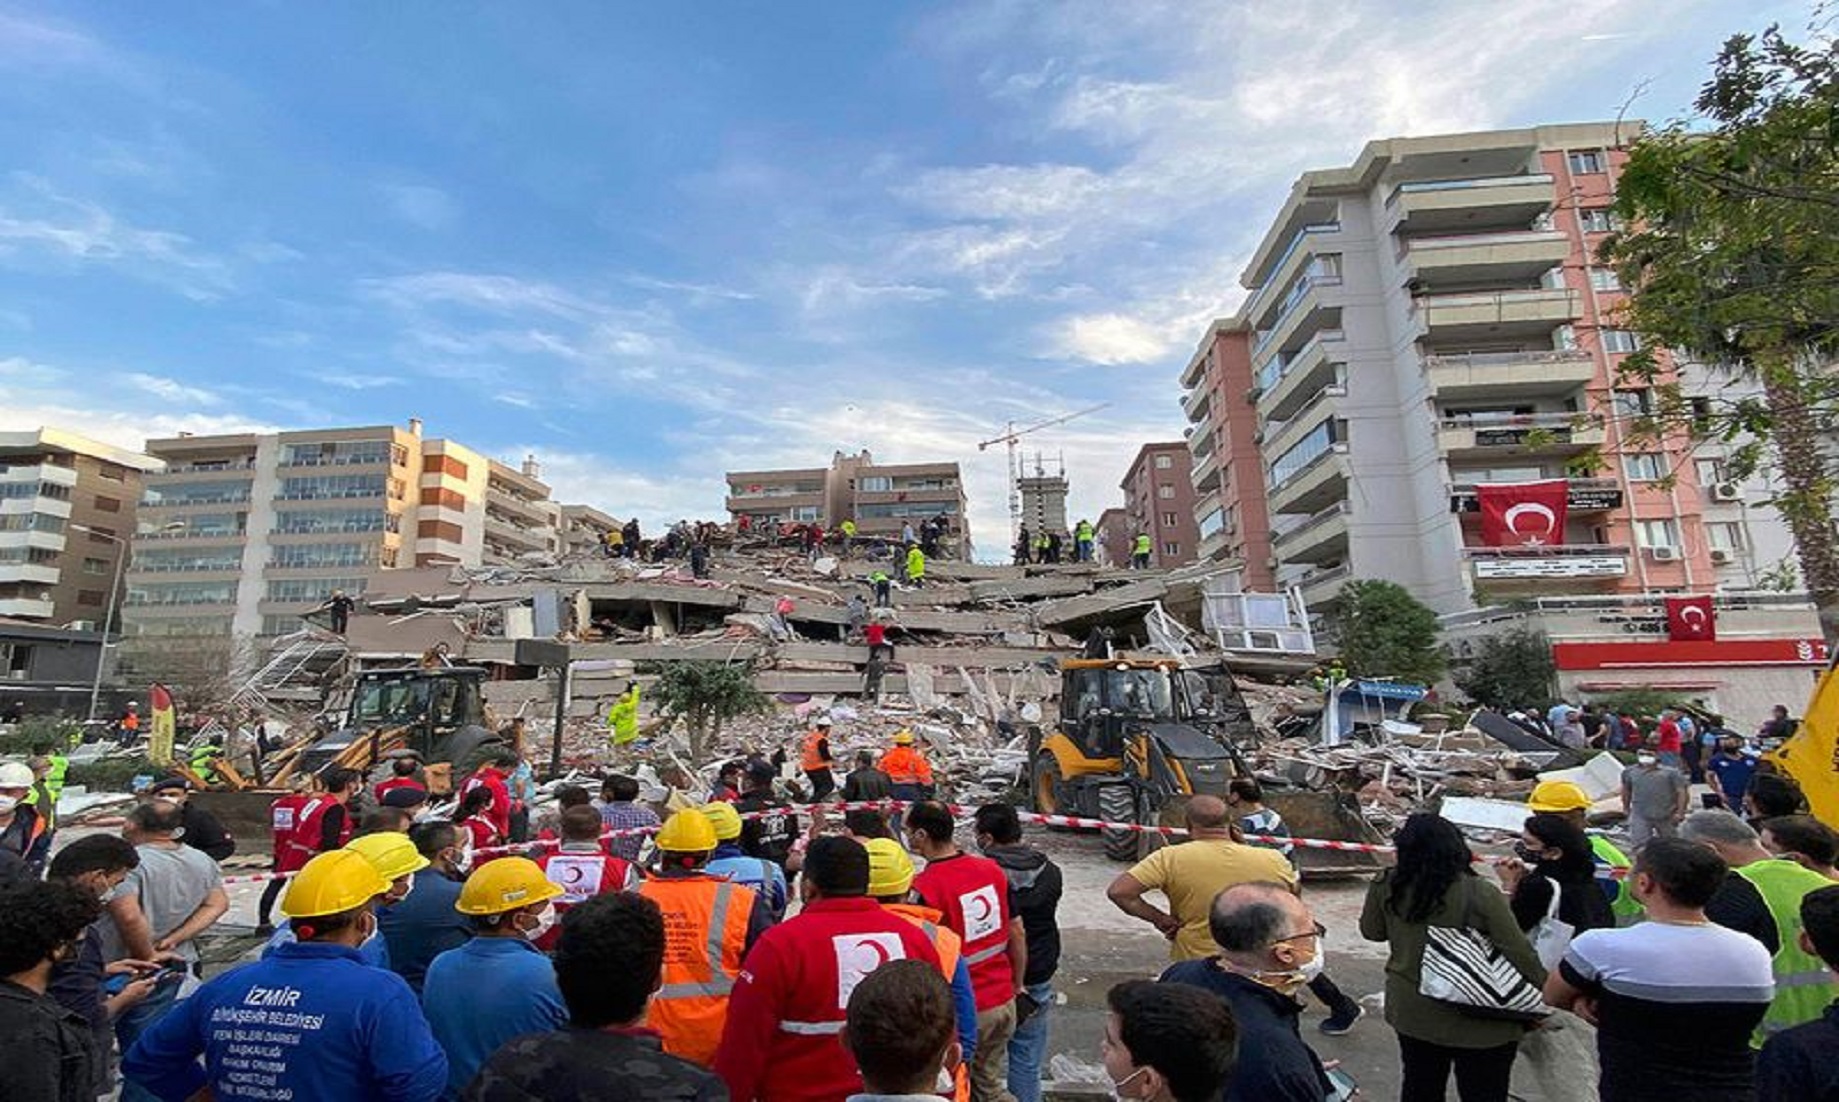 Death toll after earthquake in Turkey increases to 95: emergencies department